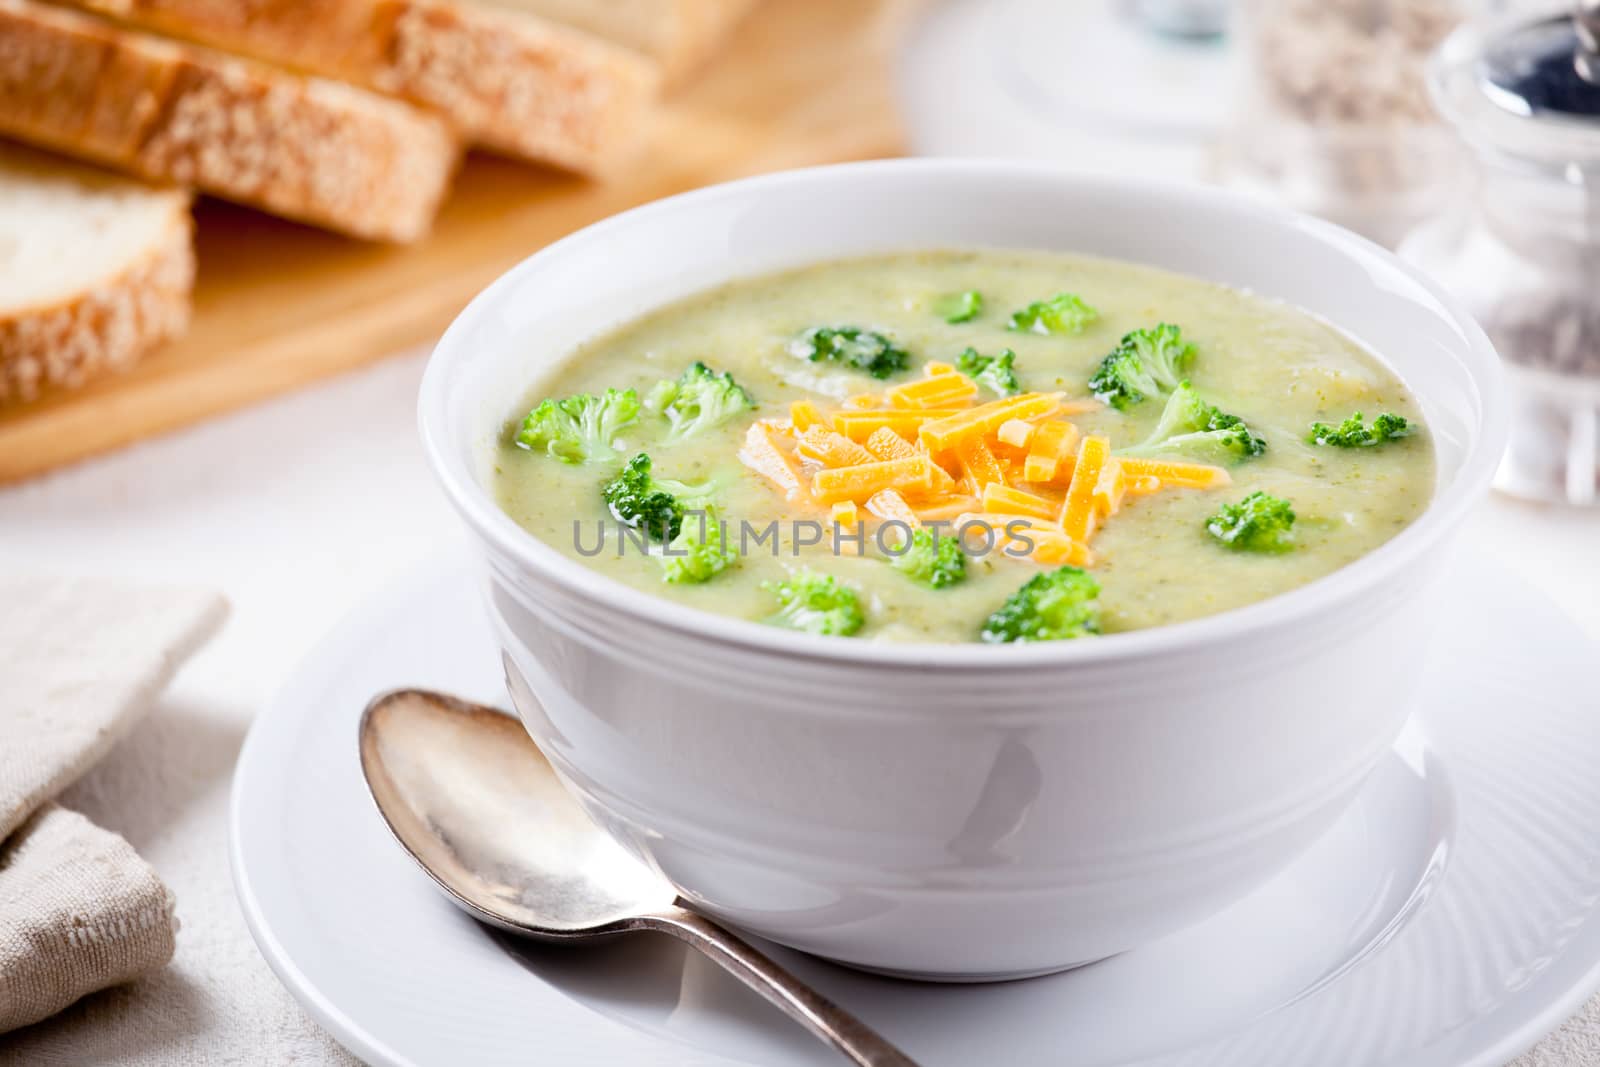 Homemade Broccoli Soup With Cheddar Cheese by mpessaris